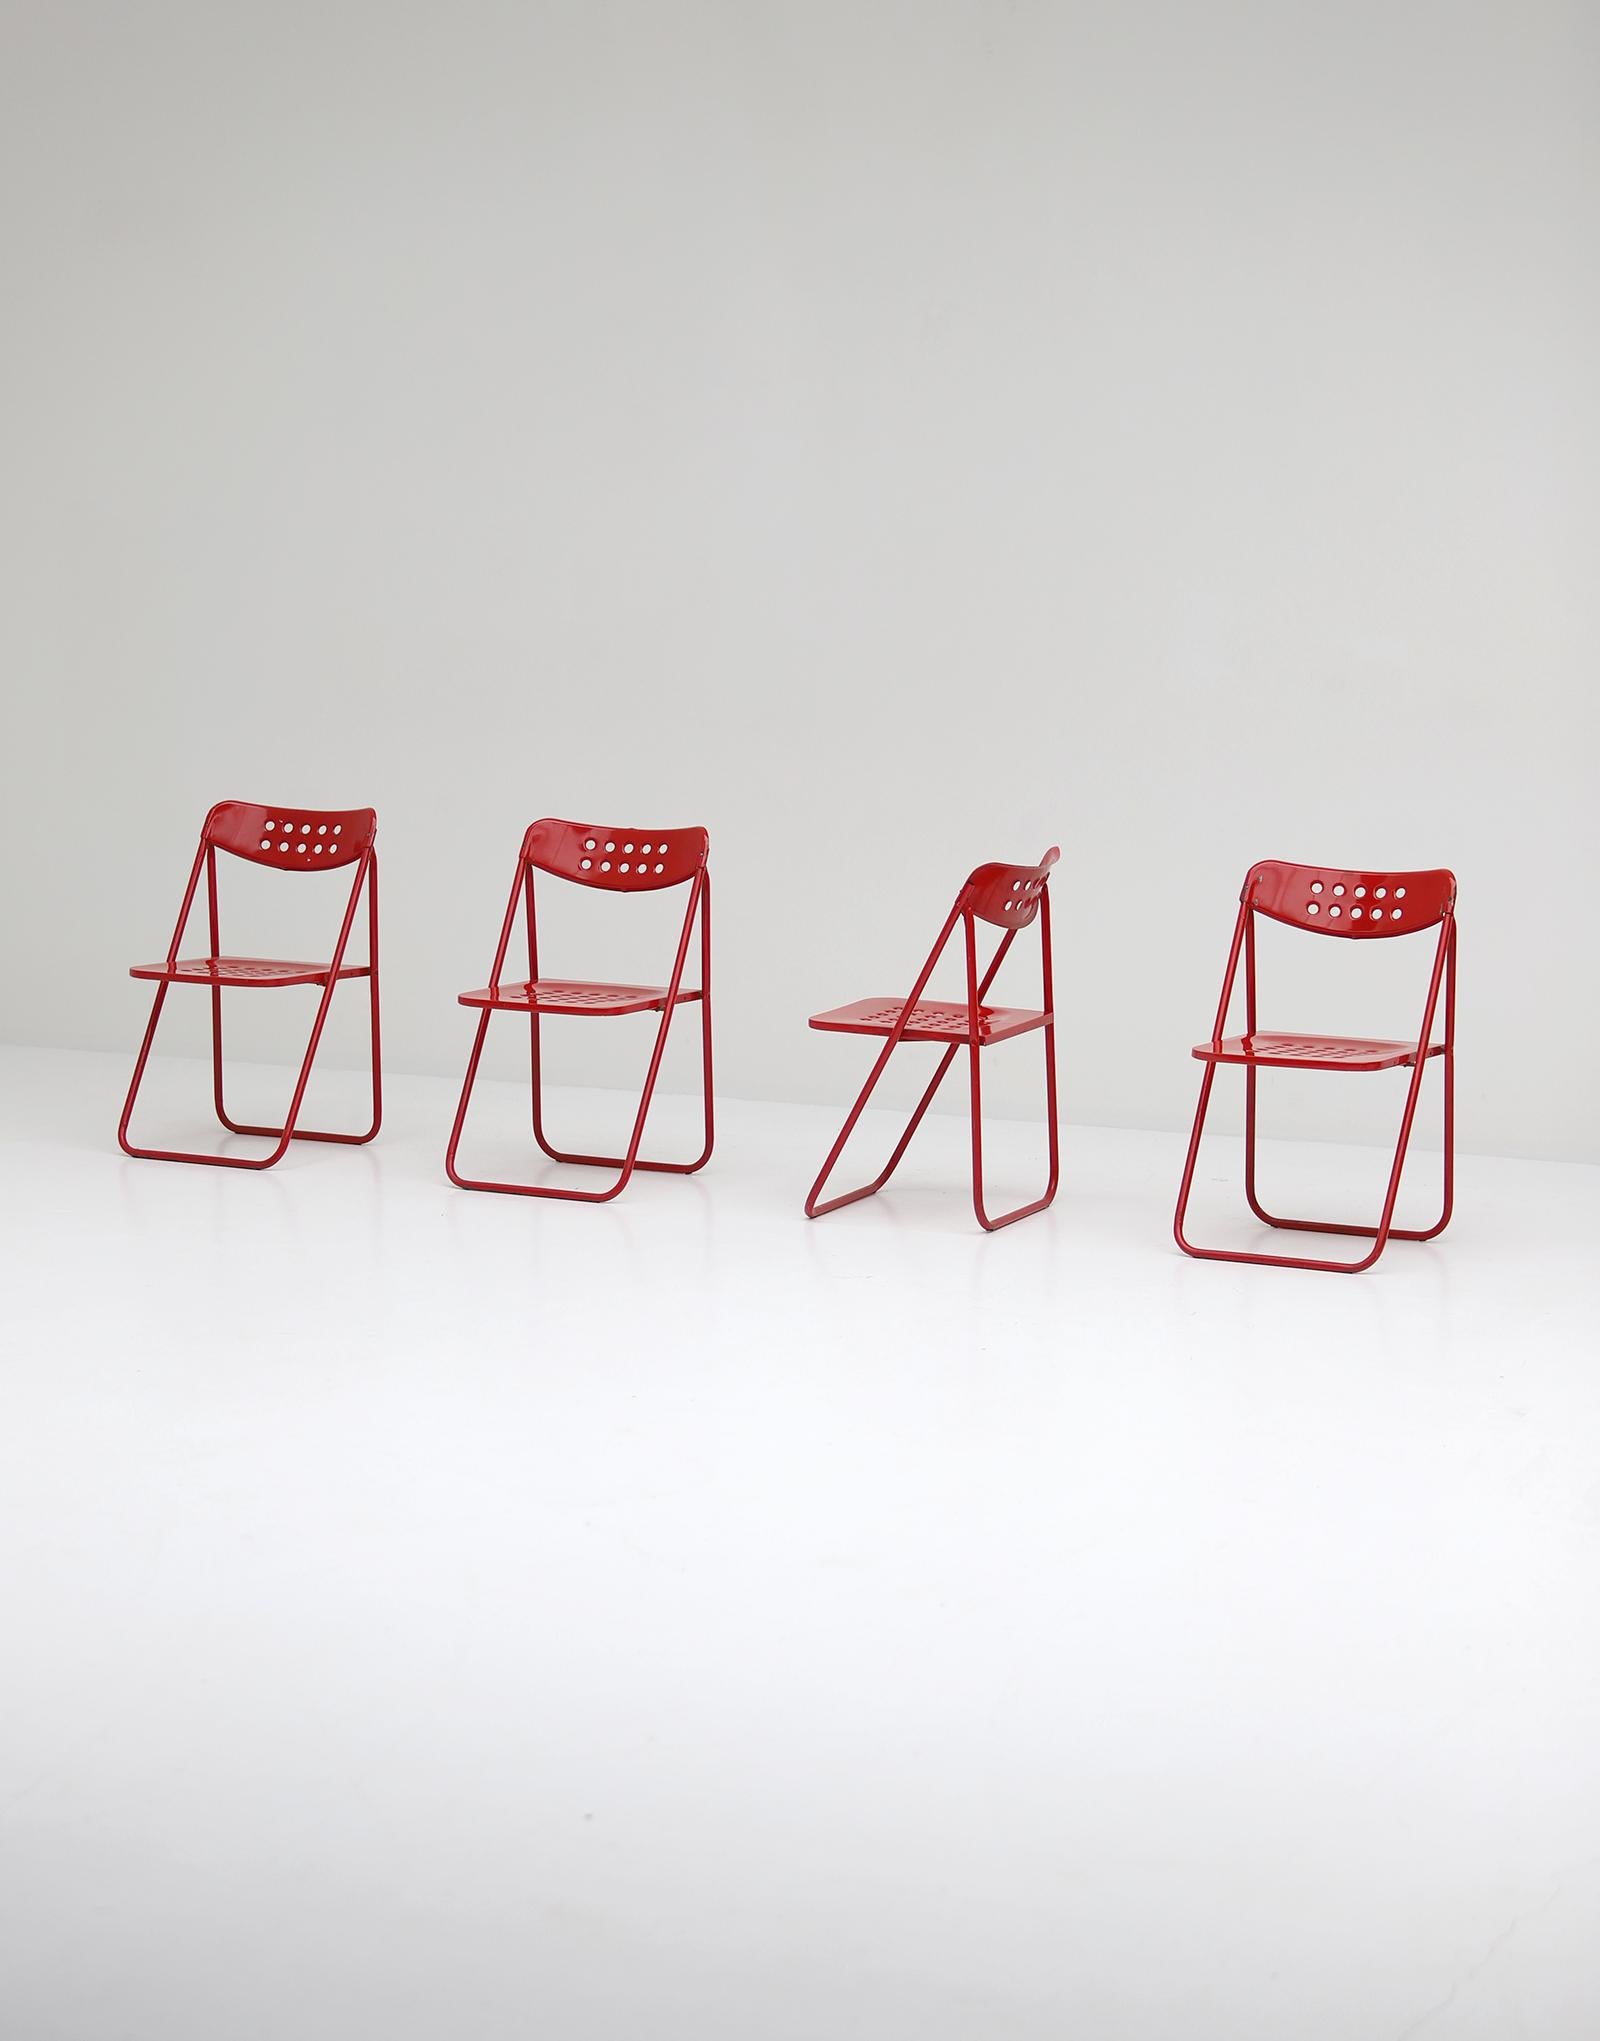 Set of four red metal folding chairs dating from the 80s. A decorative set to spice up your kitchen, dining room or even terrace. Very playful set, standing in a good condition.